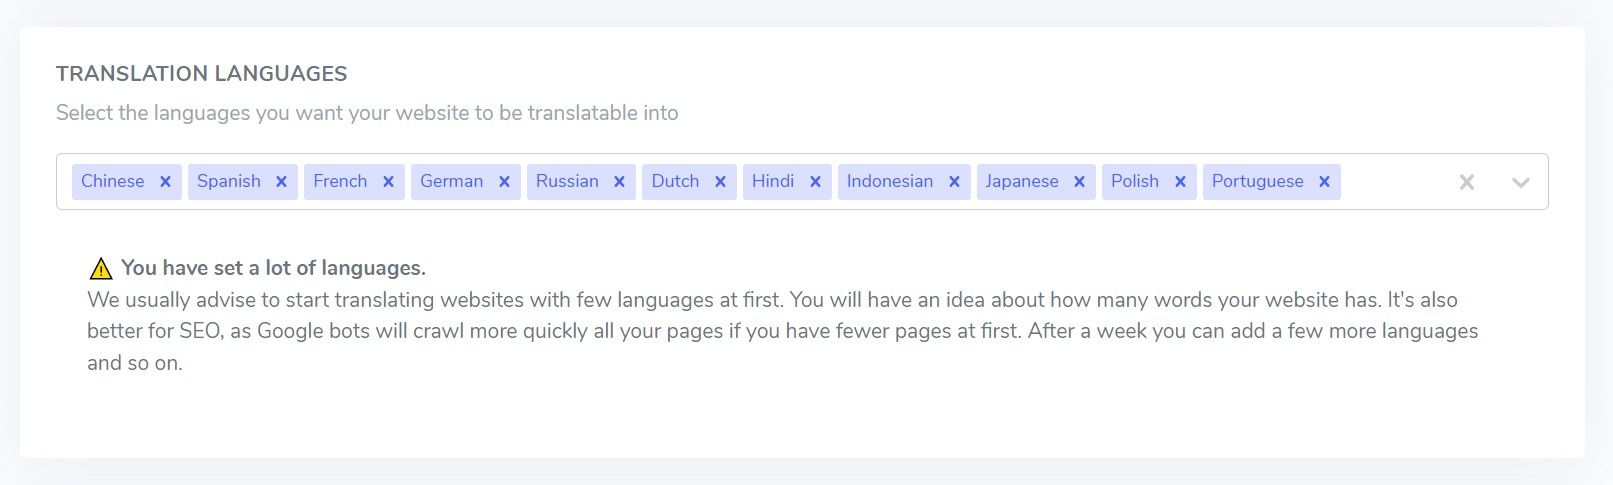 How to translate your entire website online at an affordable price - add languages